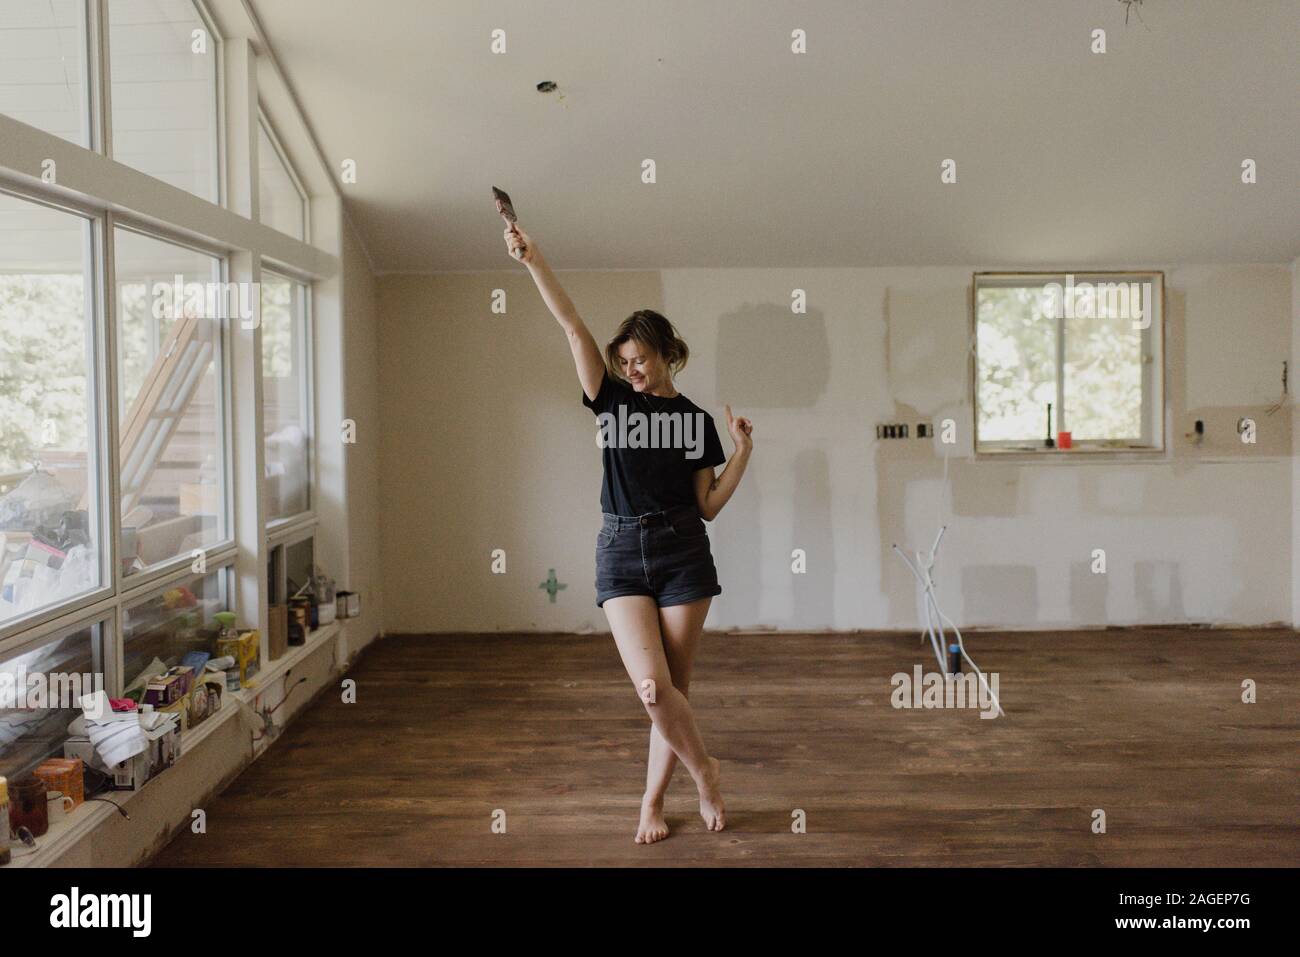 Woman holding paintbrush and dancing in new home Stock Photo